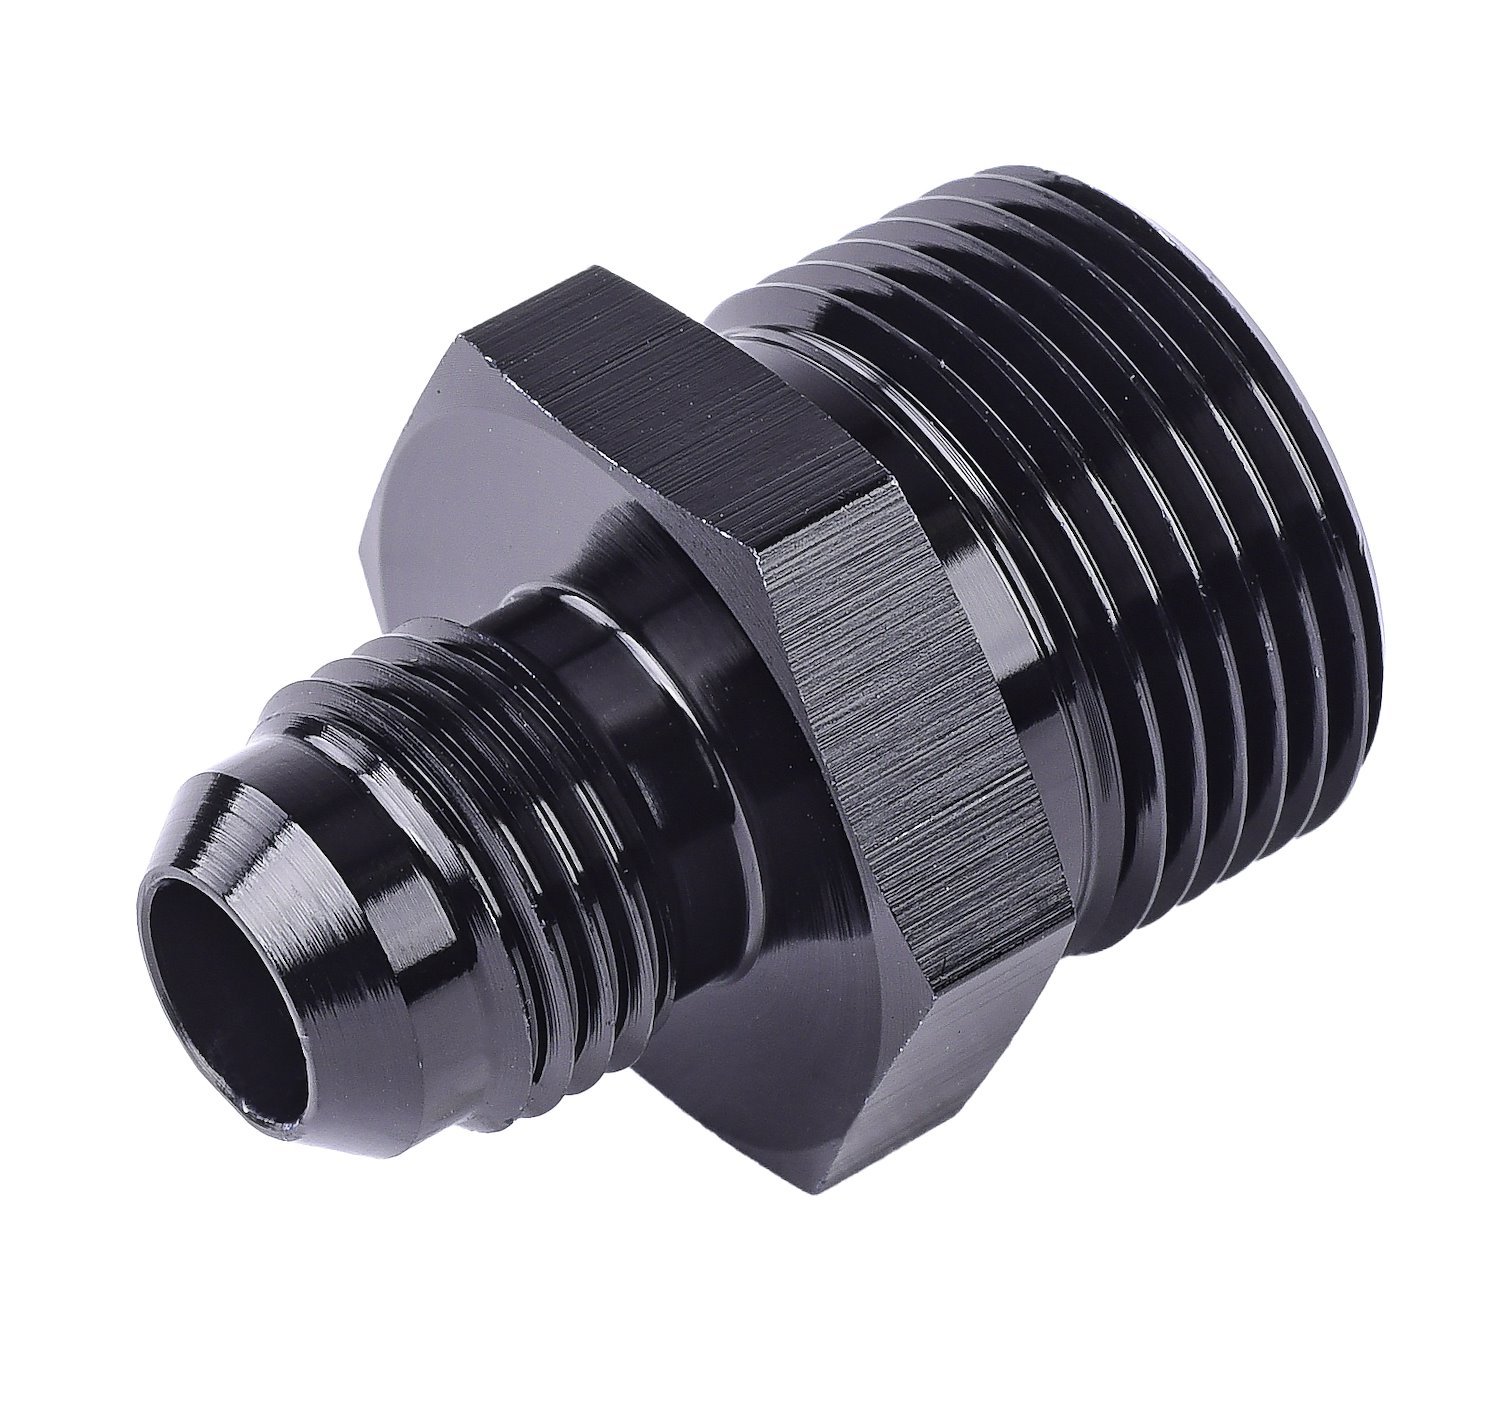 AN to Metric Adapter Fitting [-6 AN Male to 22mm x 1.5 Male, Black]